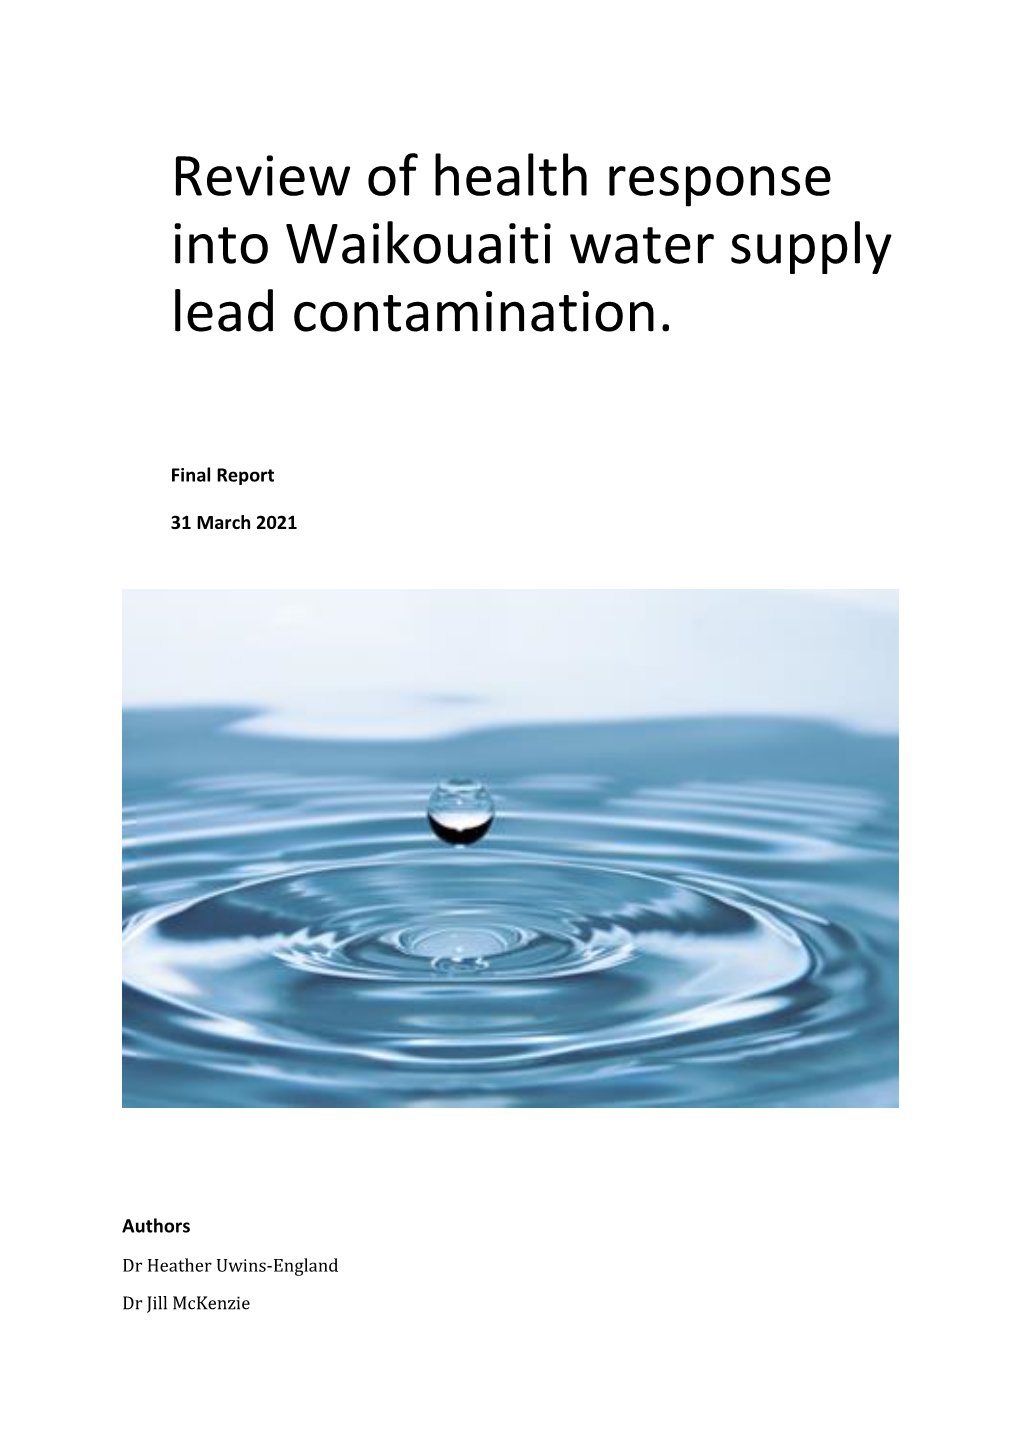 Review of Health Response Into Waikouaiti Water Supply Lead Contamination